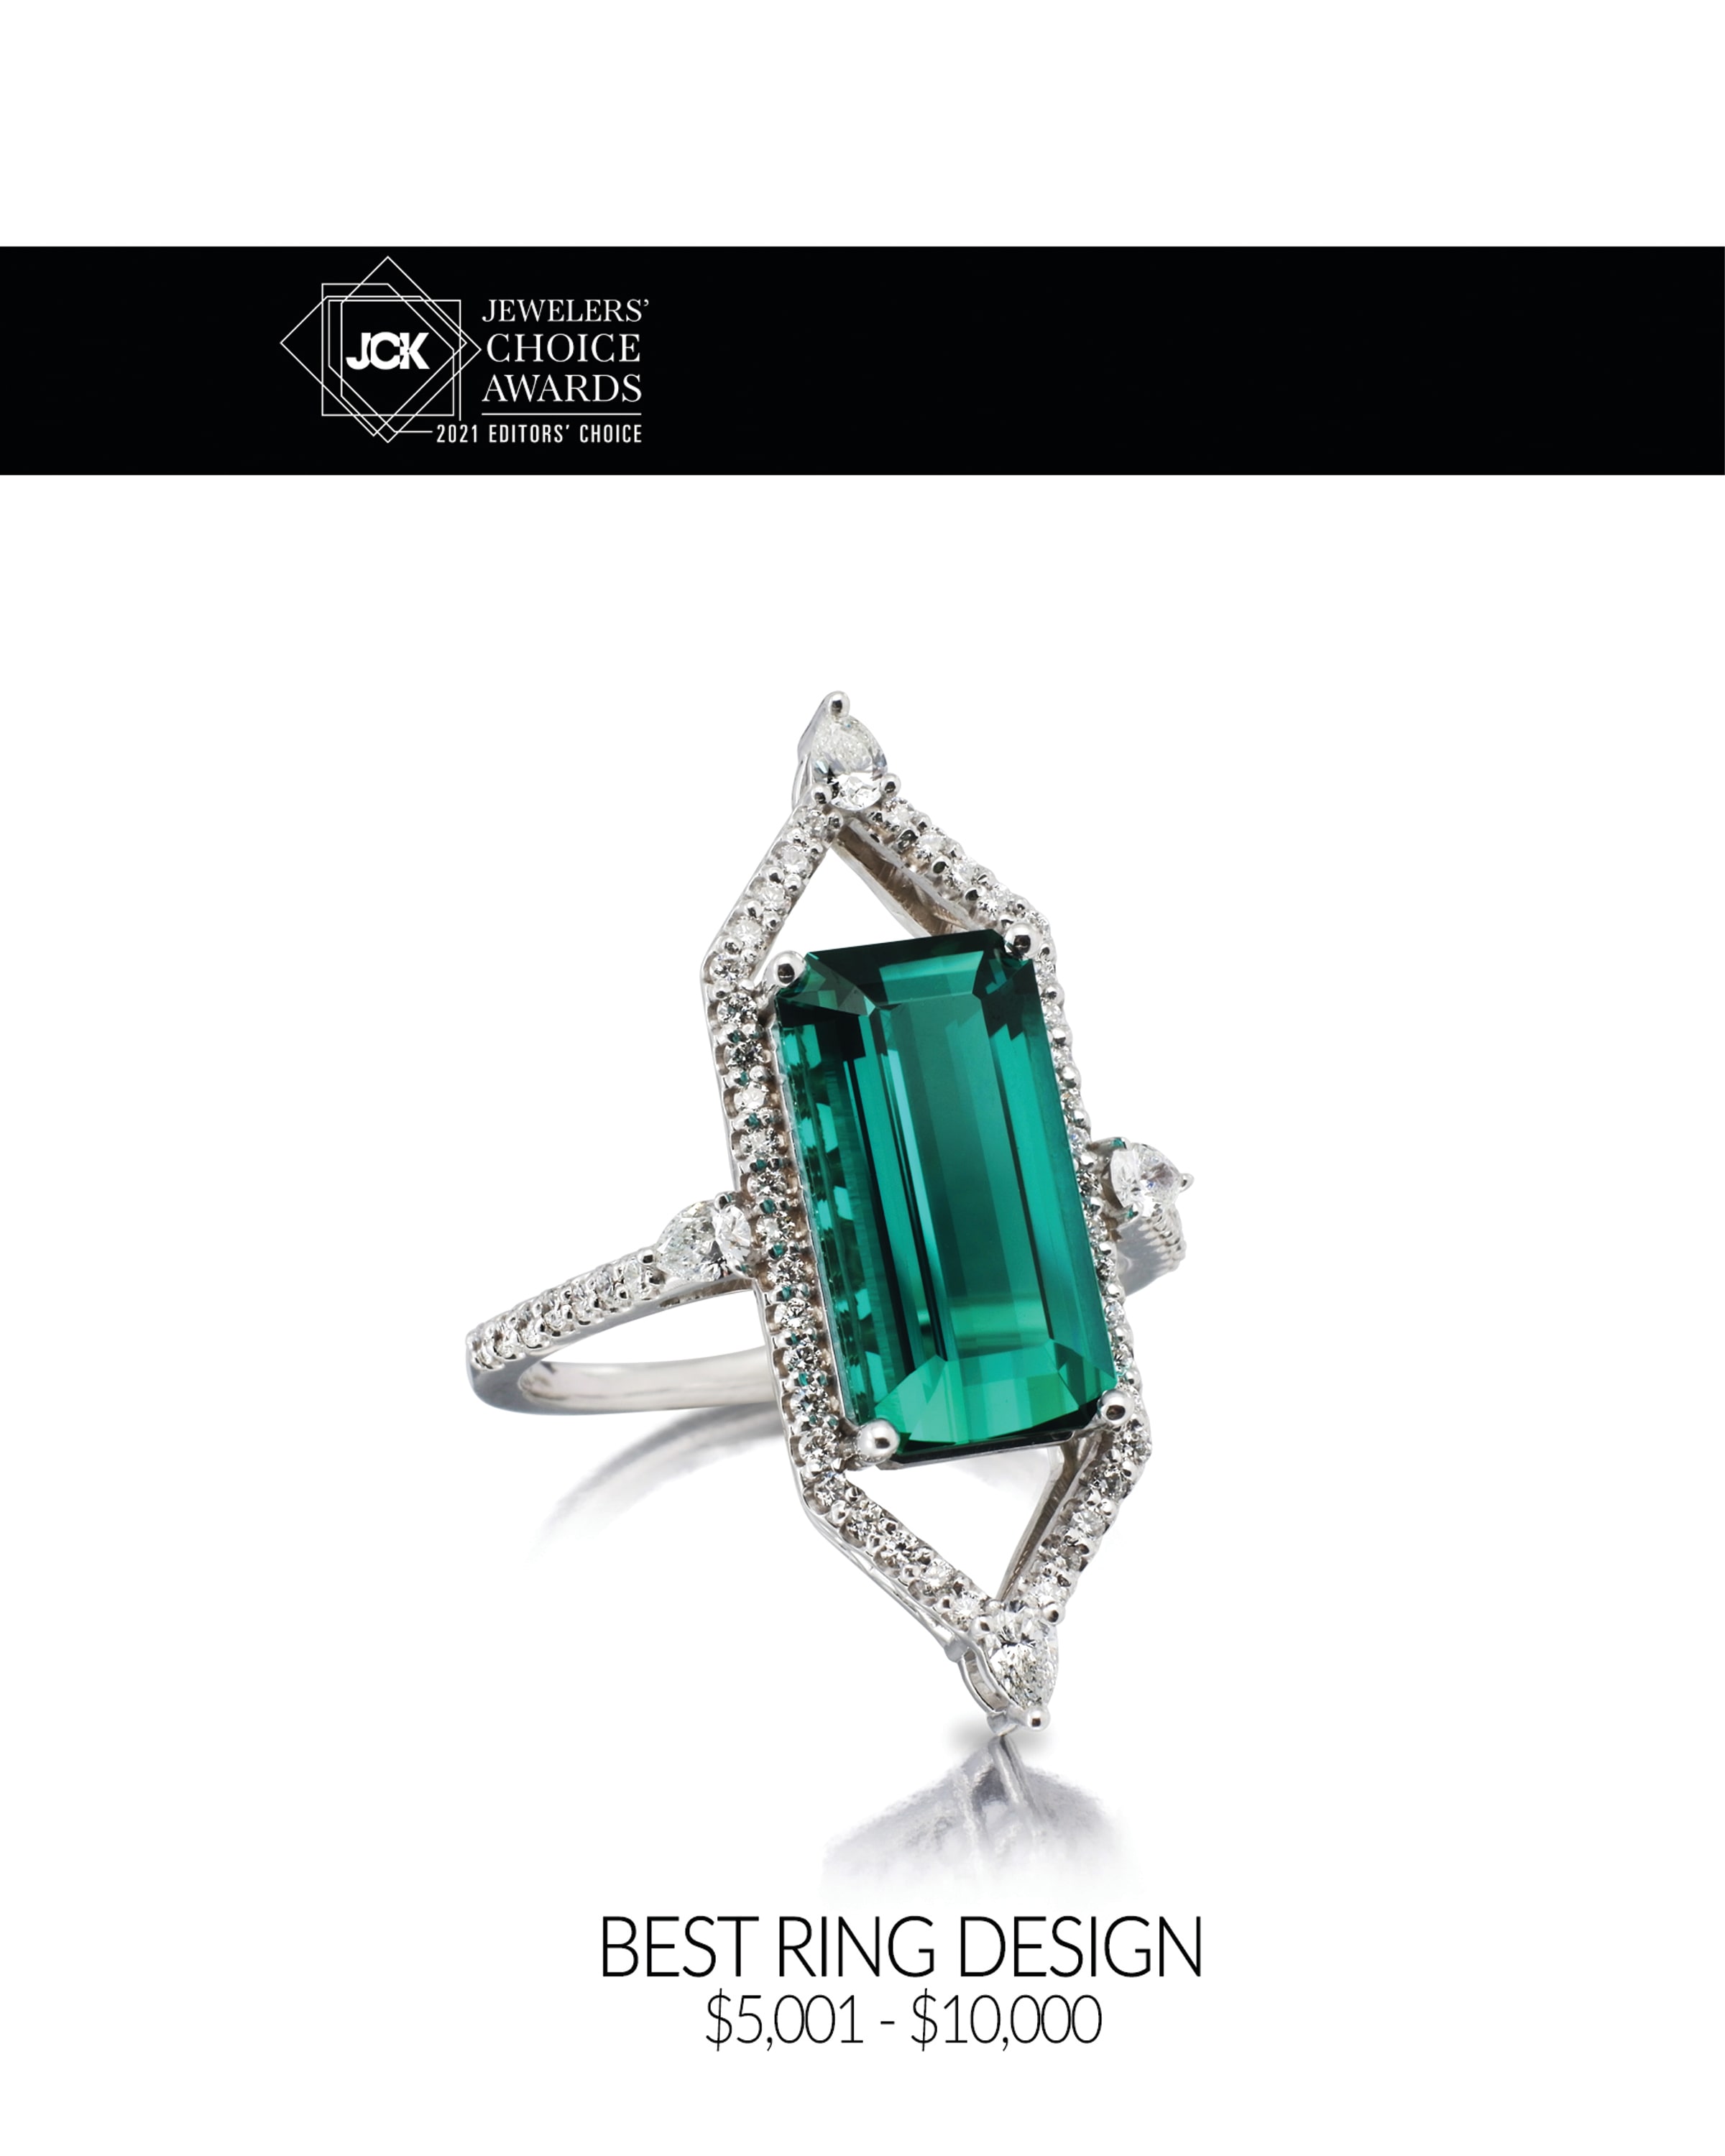 2021 JCK BEST RING DESIGN - $5,001 - $10,000  |
A modern take on art deco featuring a striking emerald cut 4.53 ct Lagoon Tourmaline as the centerpiece and surrounded with 0.59 ct tw of pear-shaped and round diamonds. This one-of-a-kind ring was handcrafted in 100% recycled 18 kt white gold using responsibly sourced gemstones and made in the USA.